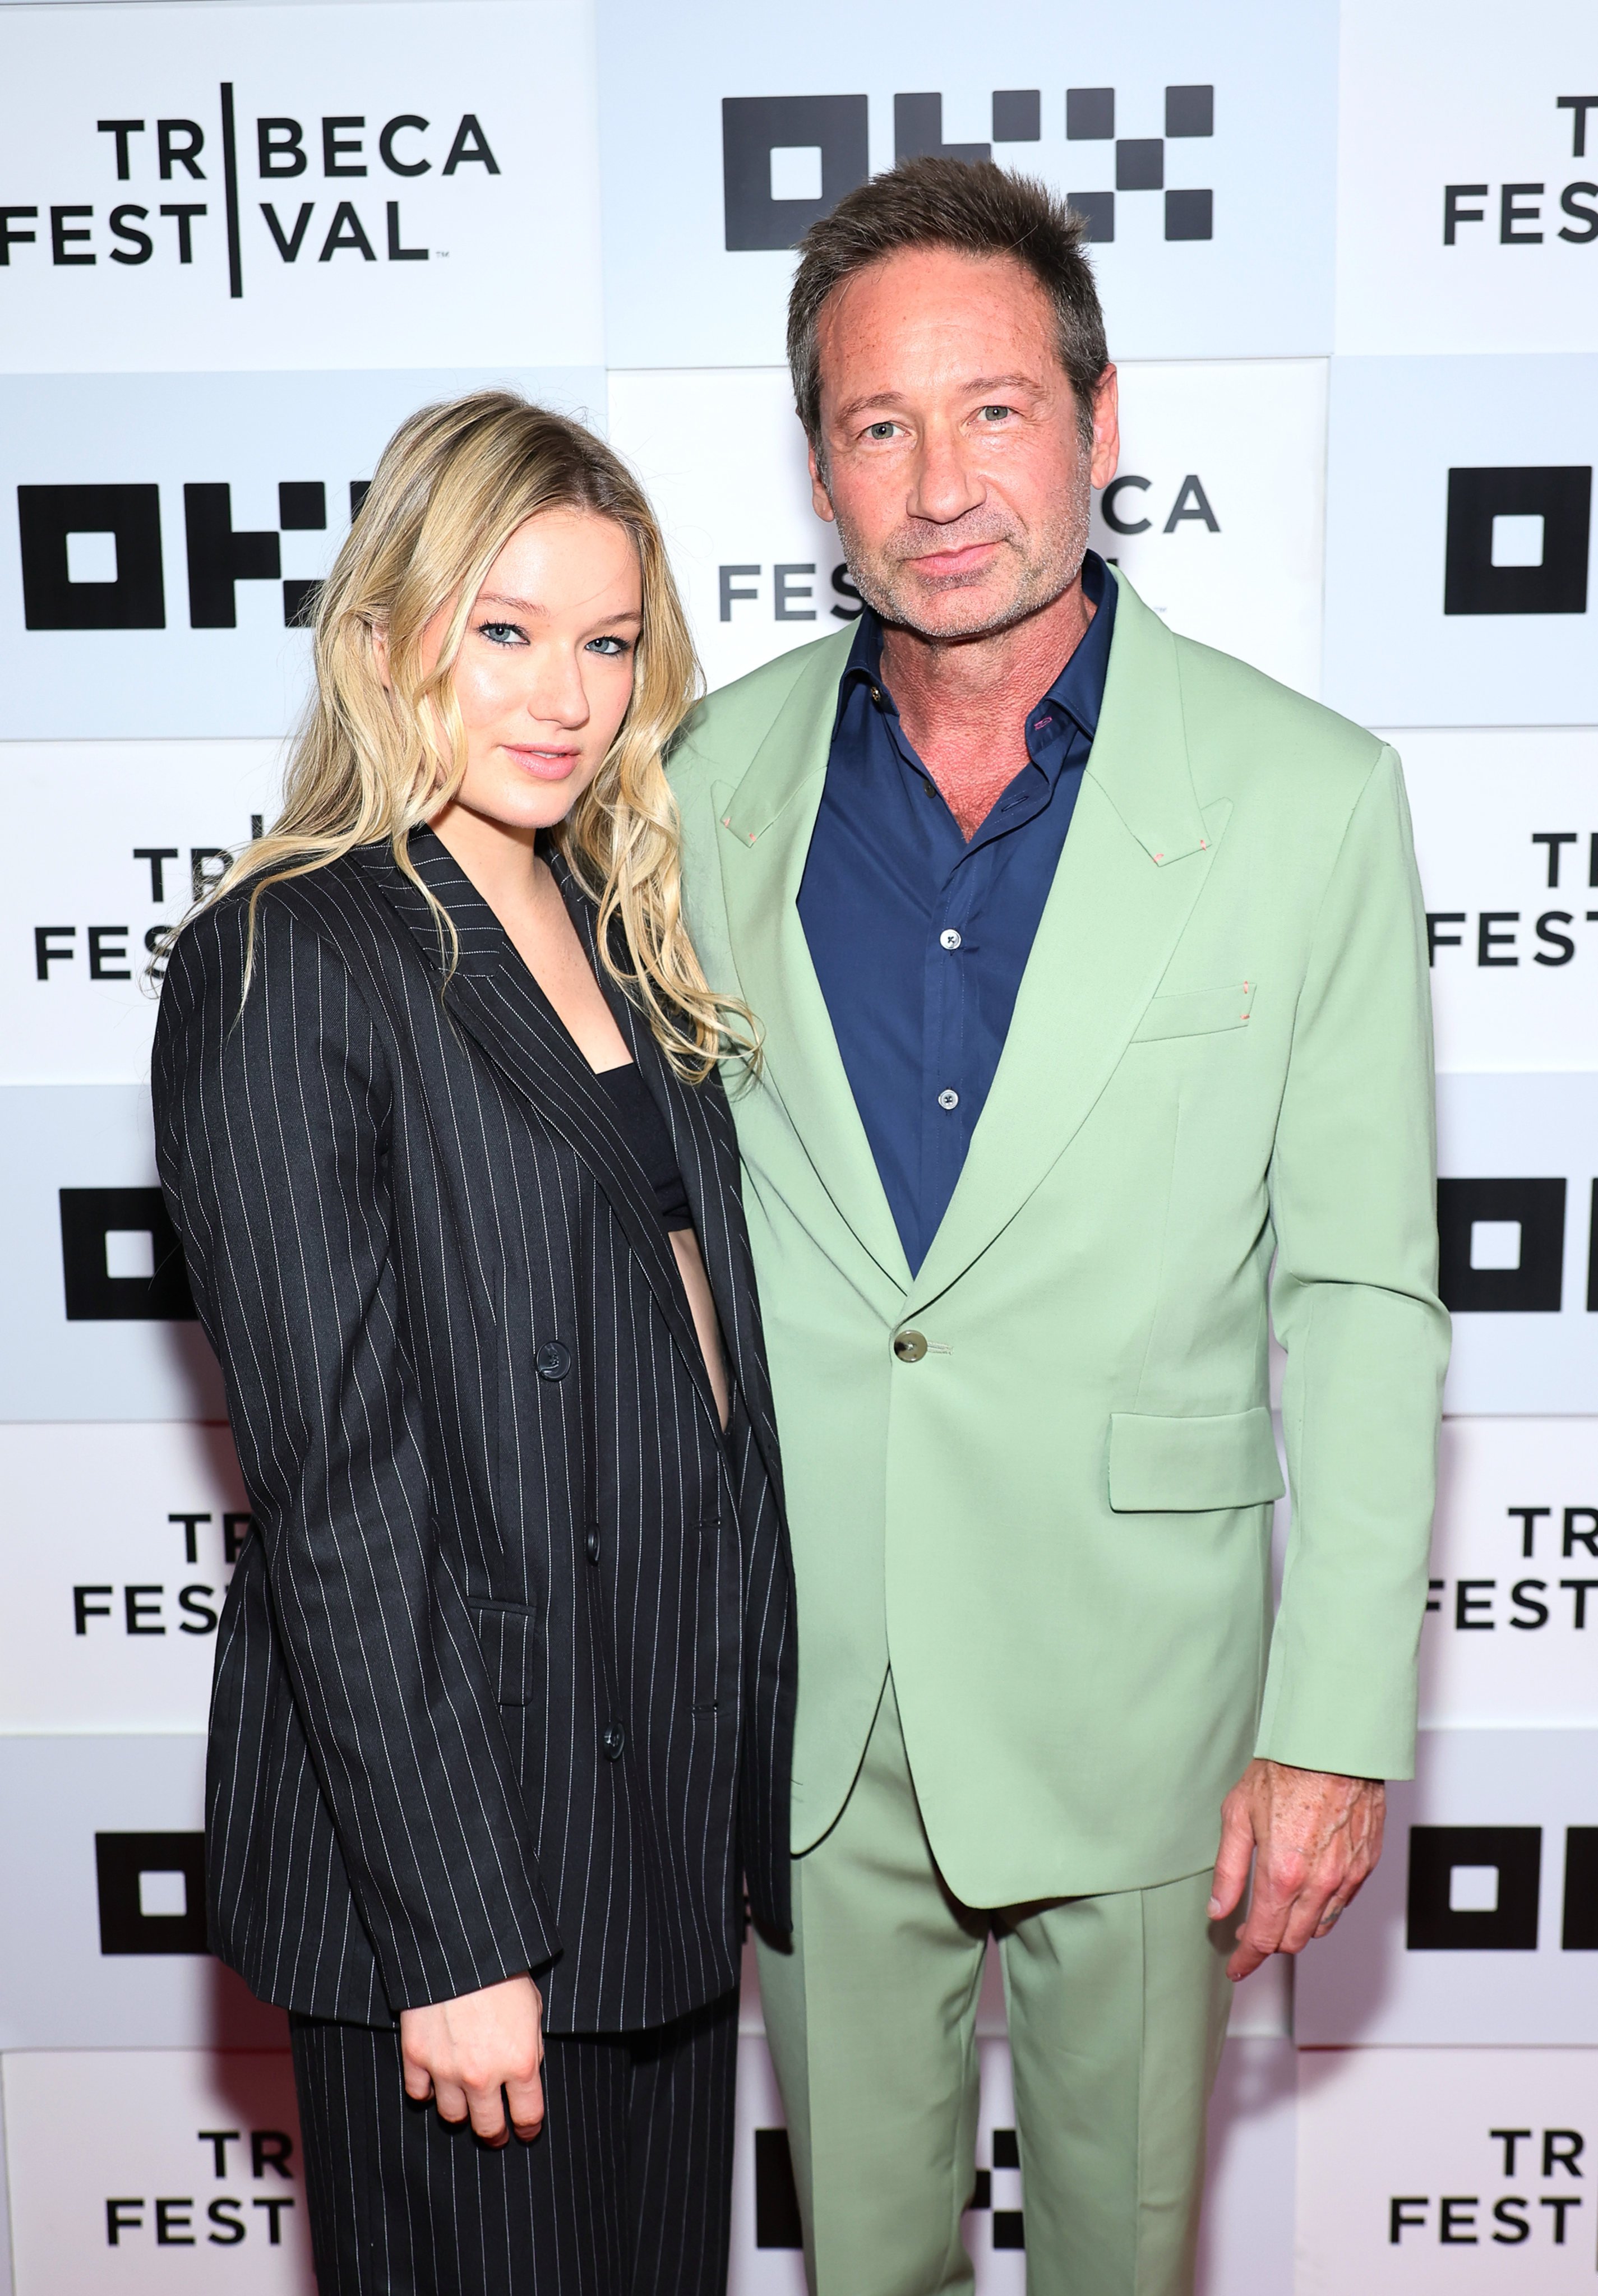 David Duchovny and his daughter West Duchovny at the 2023 Tribeca Festival in New York. Photo: Getty Images